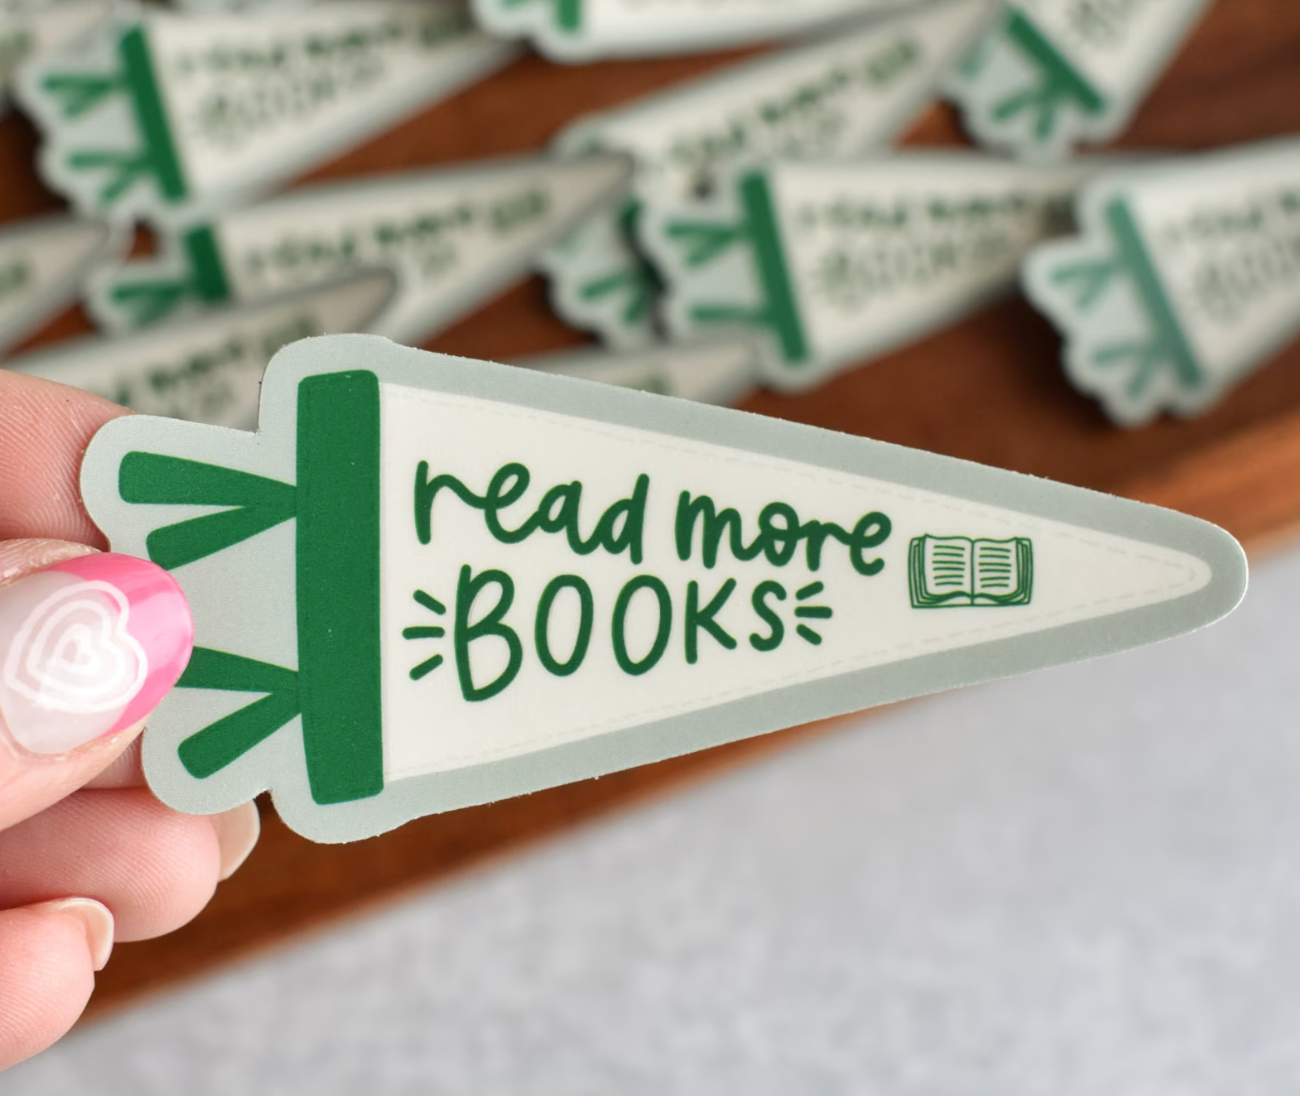 read more books pennant style sticker in green.